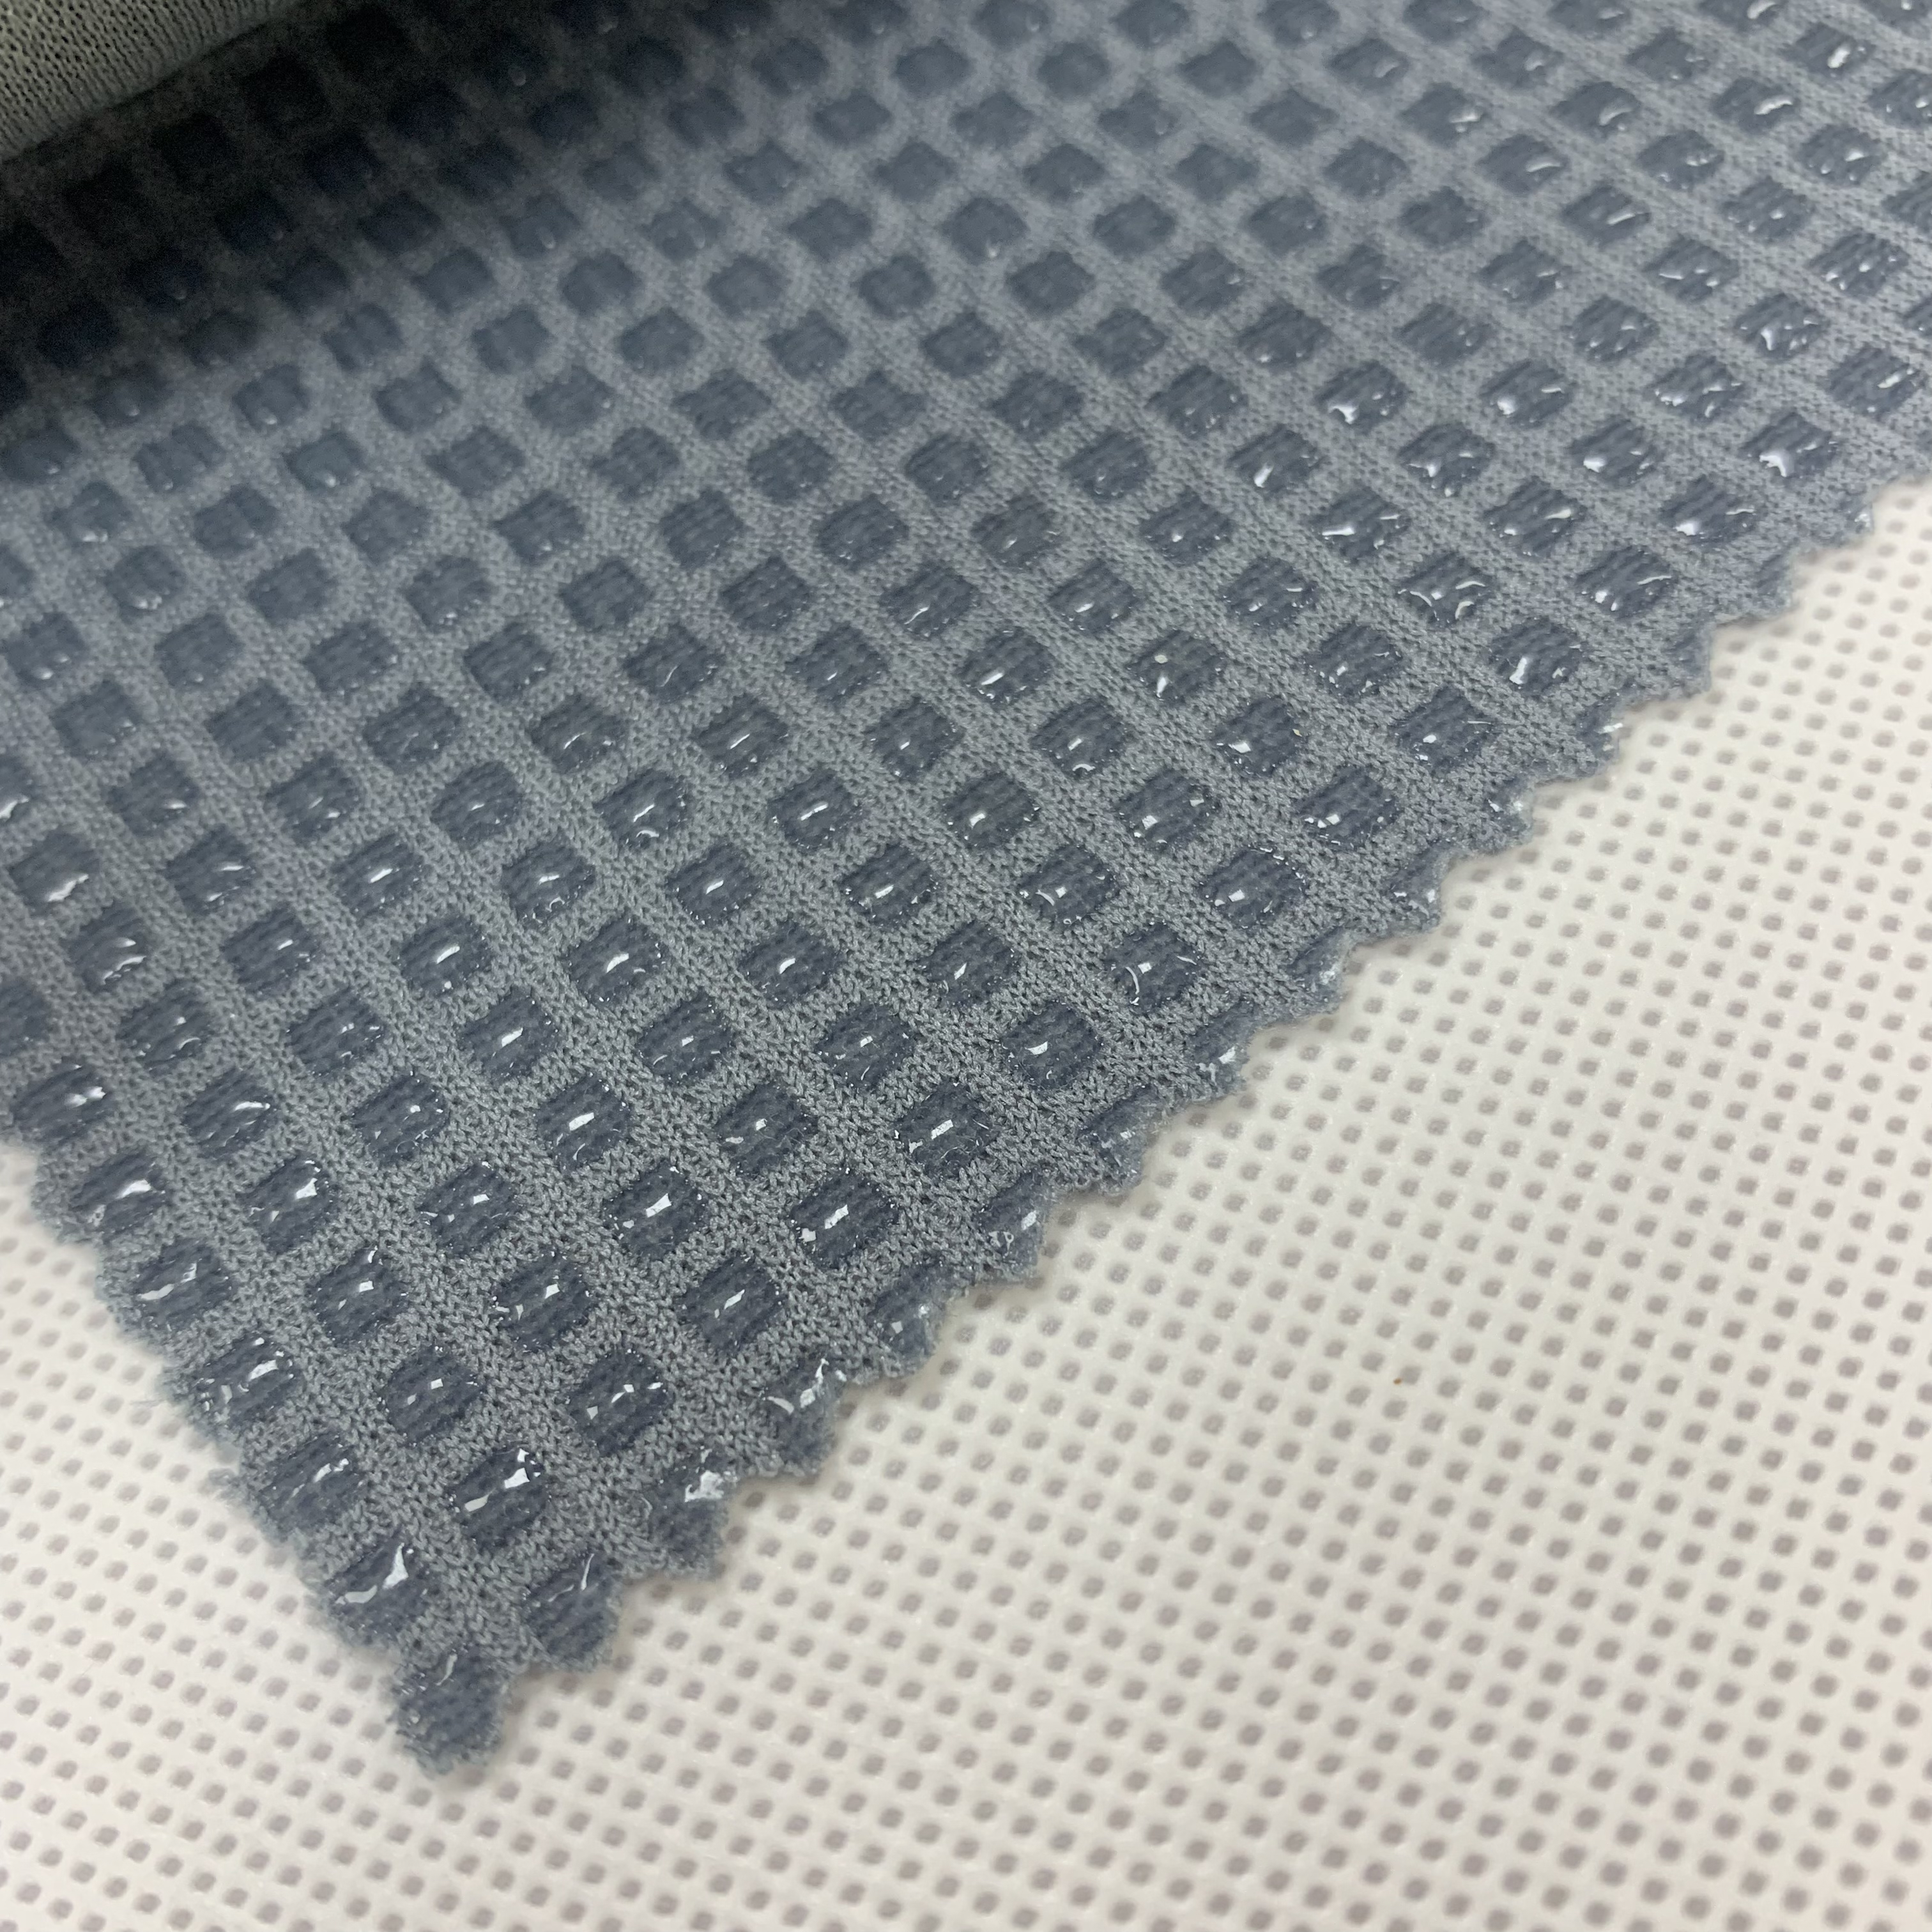 Textiles Waterproof Anti-Slip 100% PP Non-Slip Non-Woven Fabric with PVC Silicone Dots for Rugs Slipper Shoes